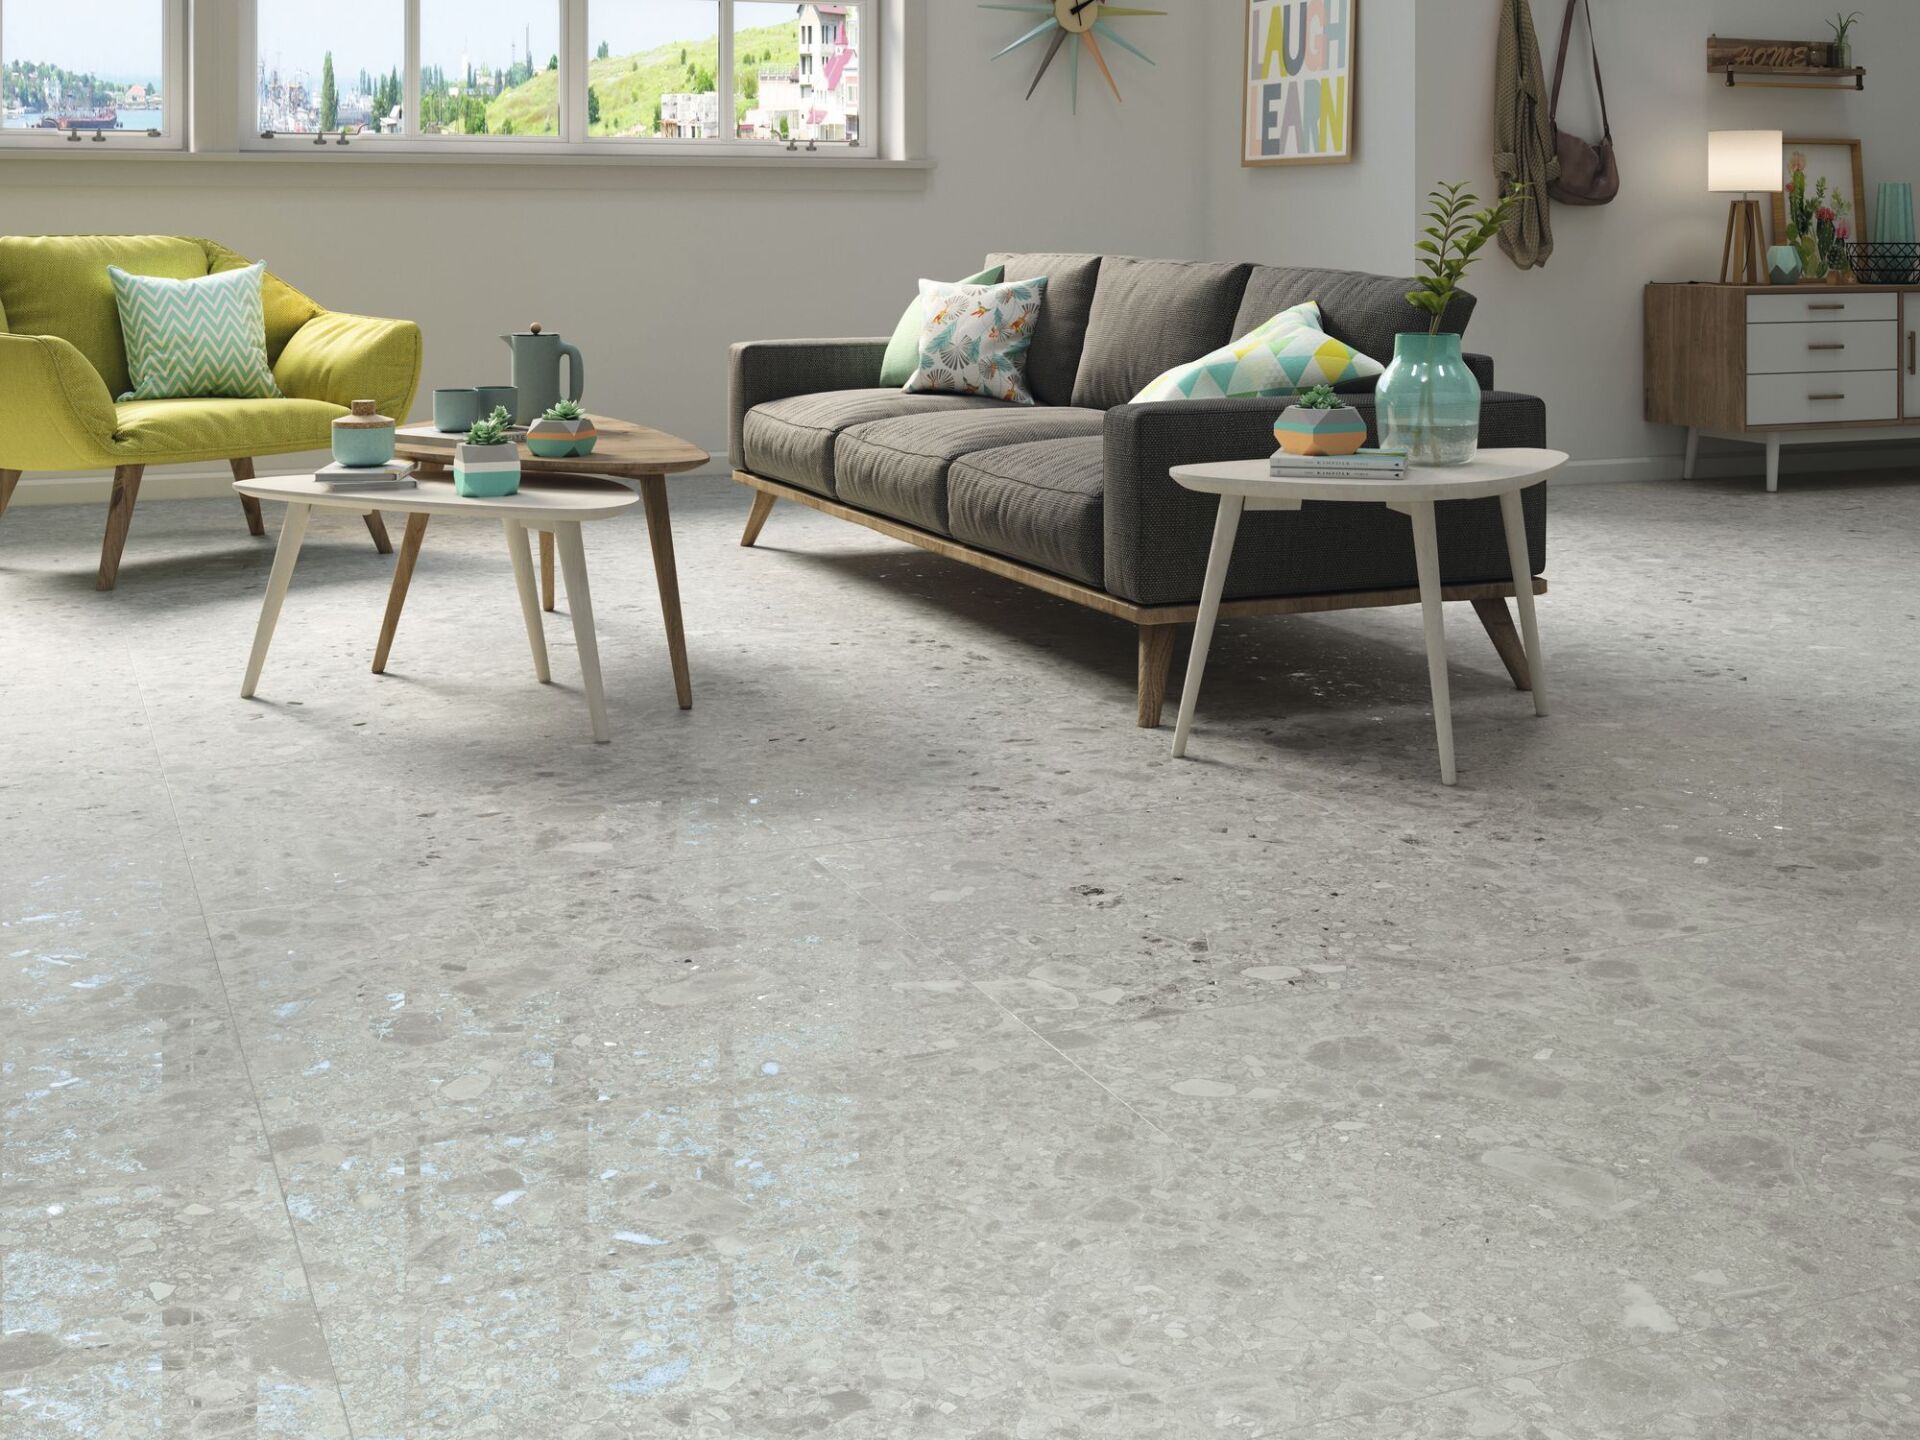 terrazzo effect tiles in a lounge area